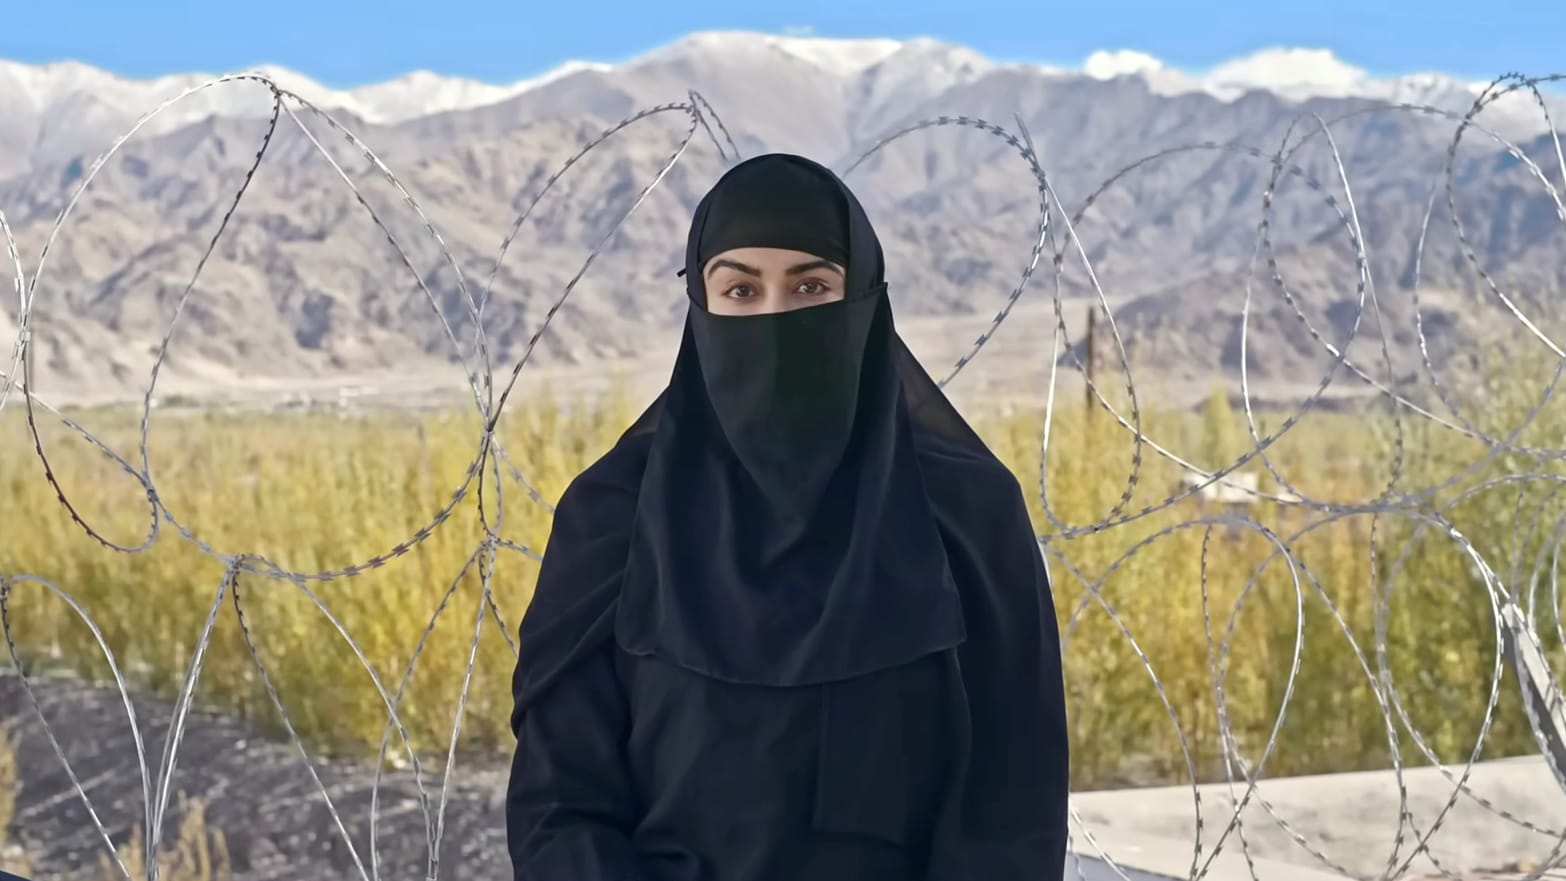 Film Inspired by ISIS Wife Forces Mom Into Living Nightmare